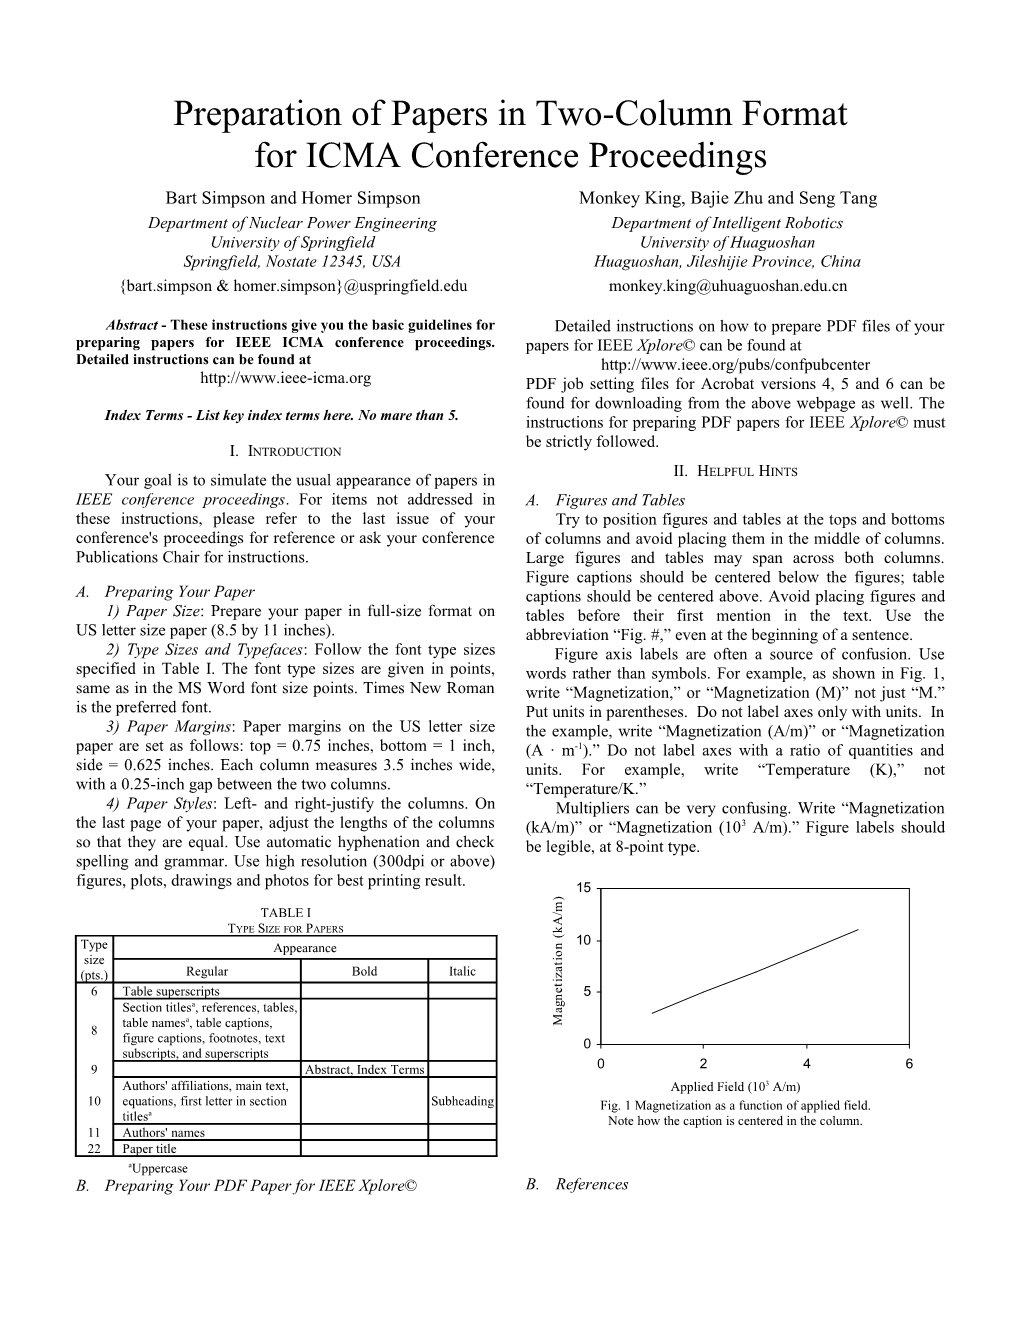 Preparation of Papers in a Two-Column Format for the 21St Annual Conference of the IEEE